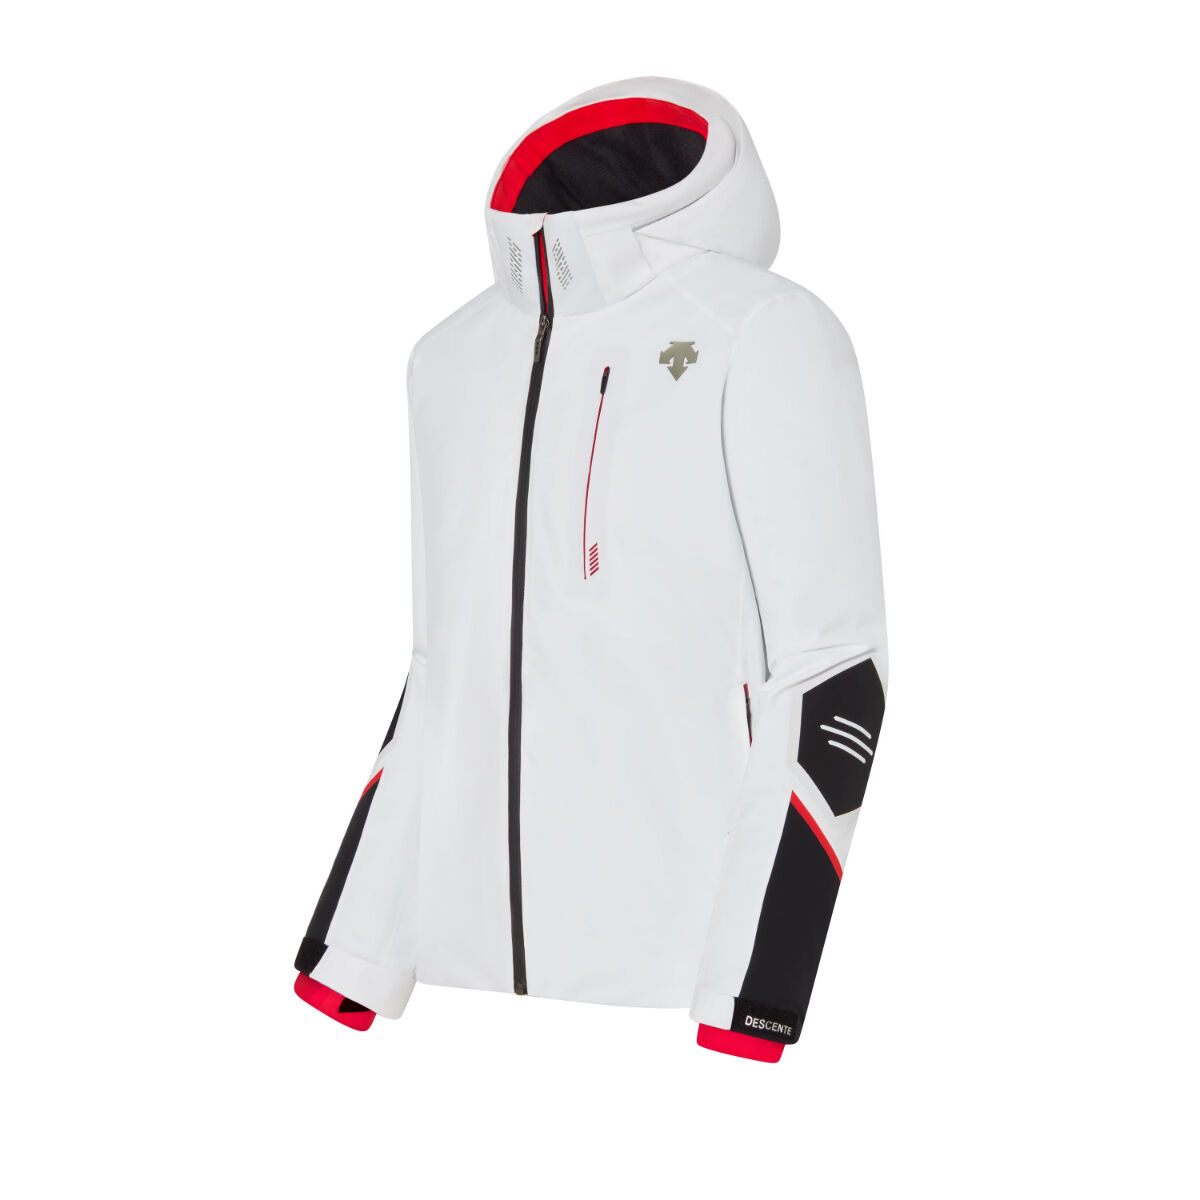 Descente Ski Jackets, Pants, and Clothing - Women's, Mens, and